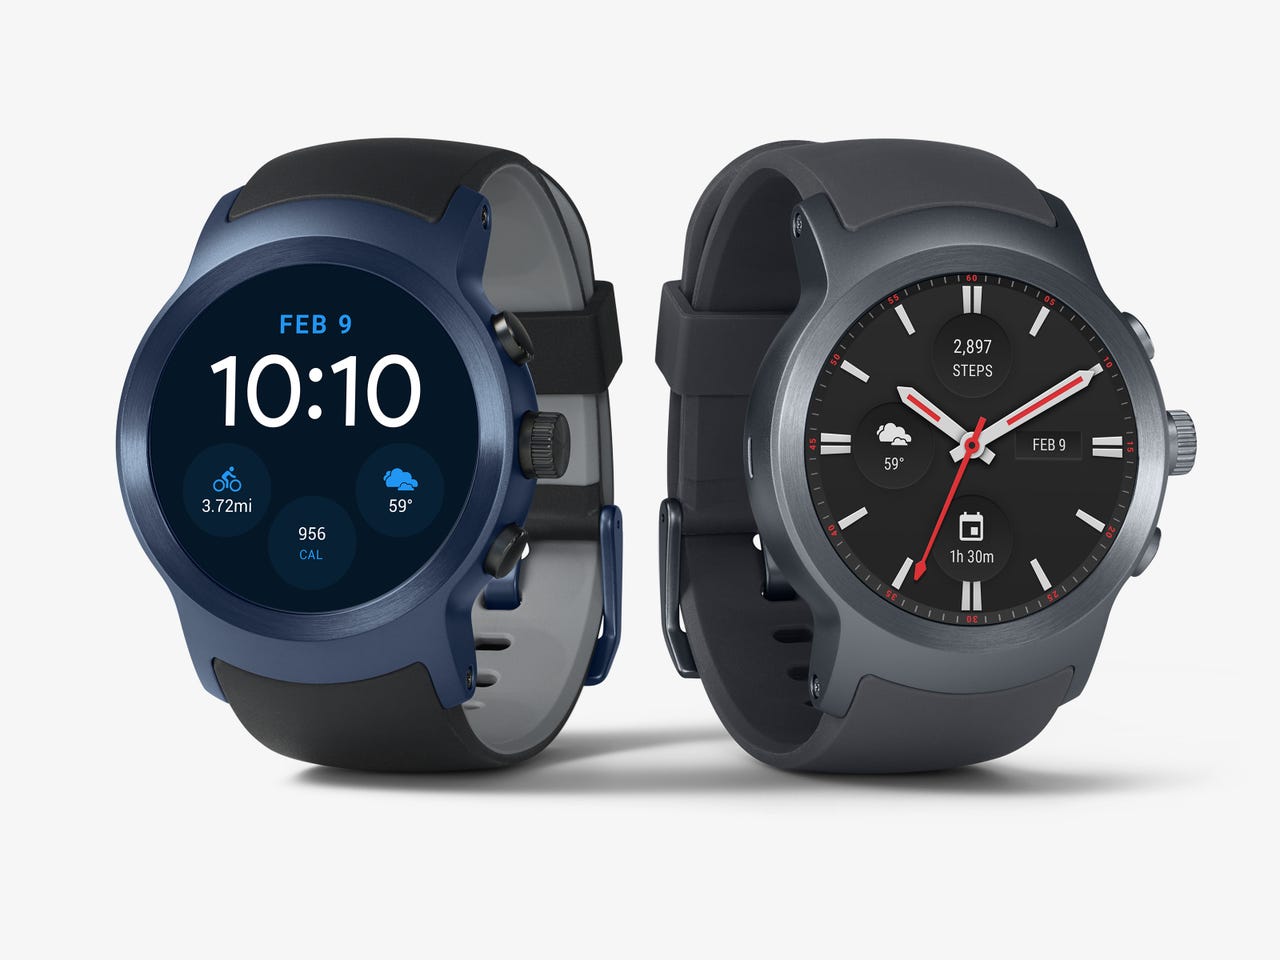 Casio launches Android Wear smartwatch that lasts a month per charge, Smartwatches